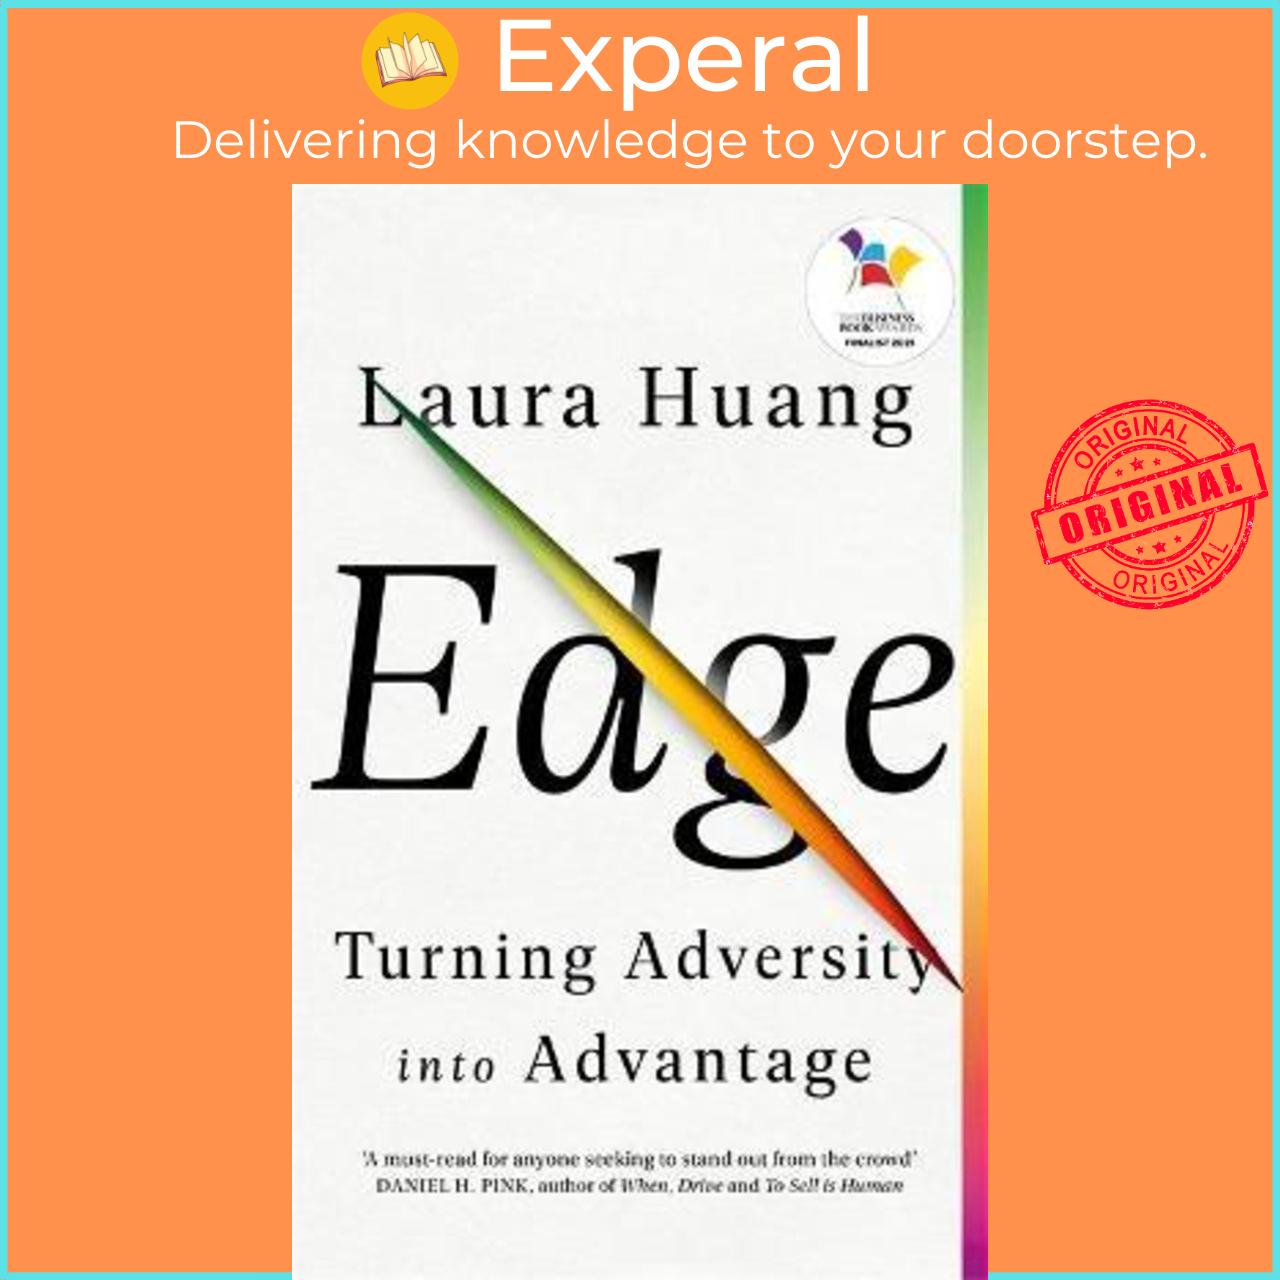 Sách - Edge : Turning Adversity into Advantage by Laura Huang (UK edition, paperback)